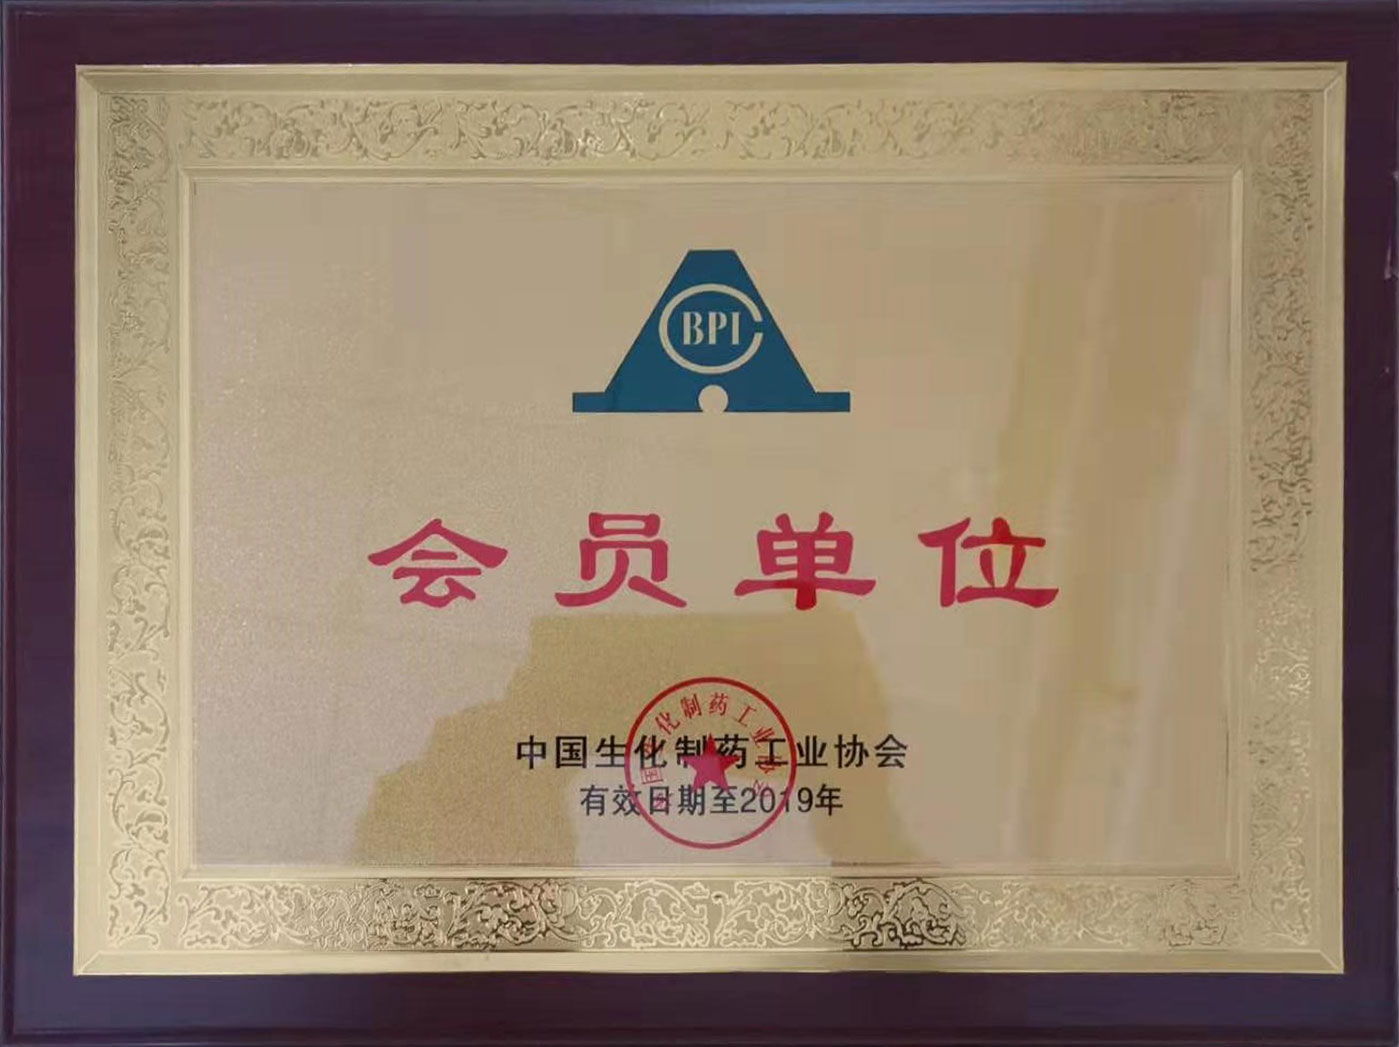 Member of China Biochemical Pharmaceutical Industry Association 